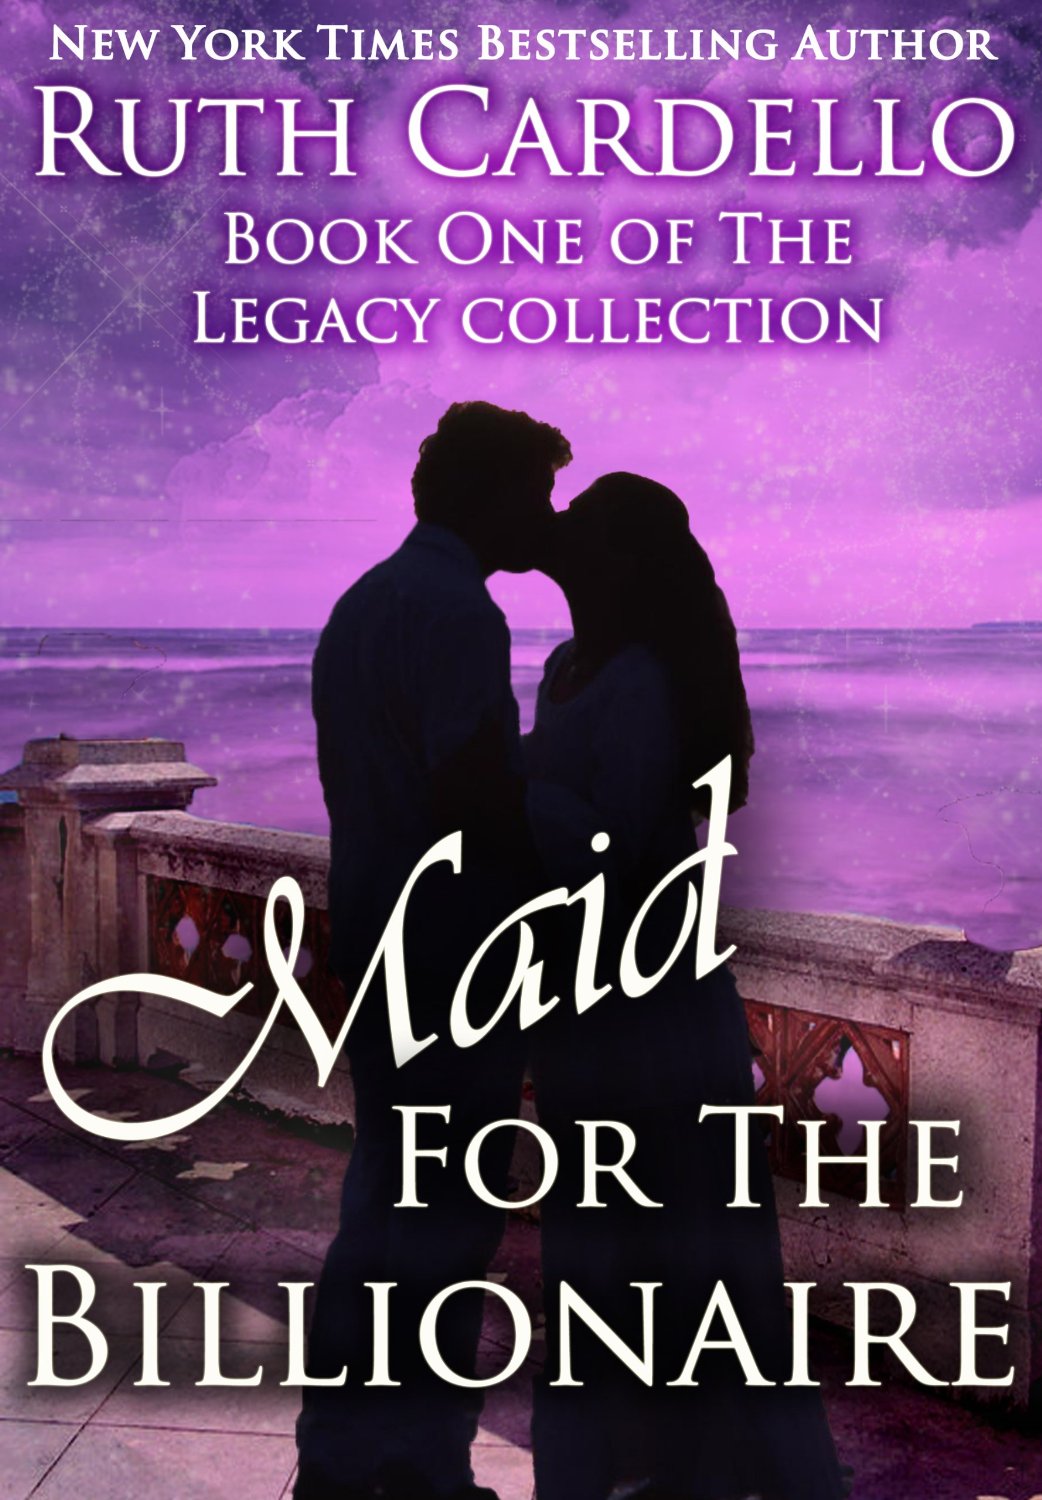 Maid for the Billionaire (Book 1) (Legacy Collection) by Ruth Cardello